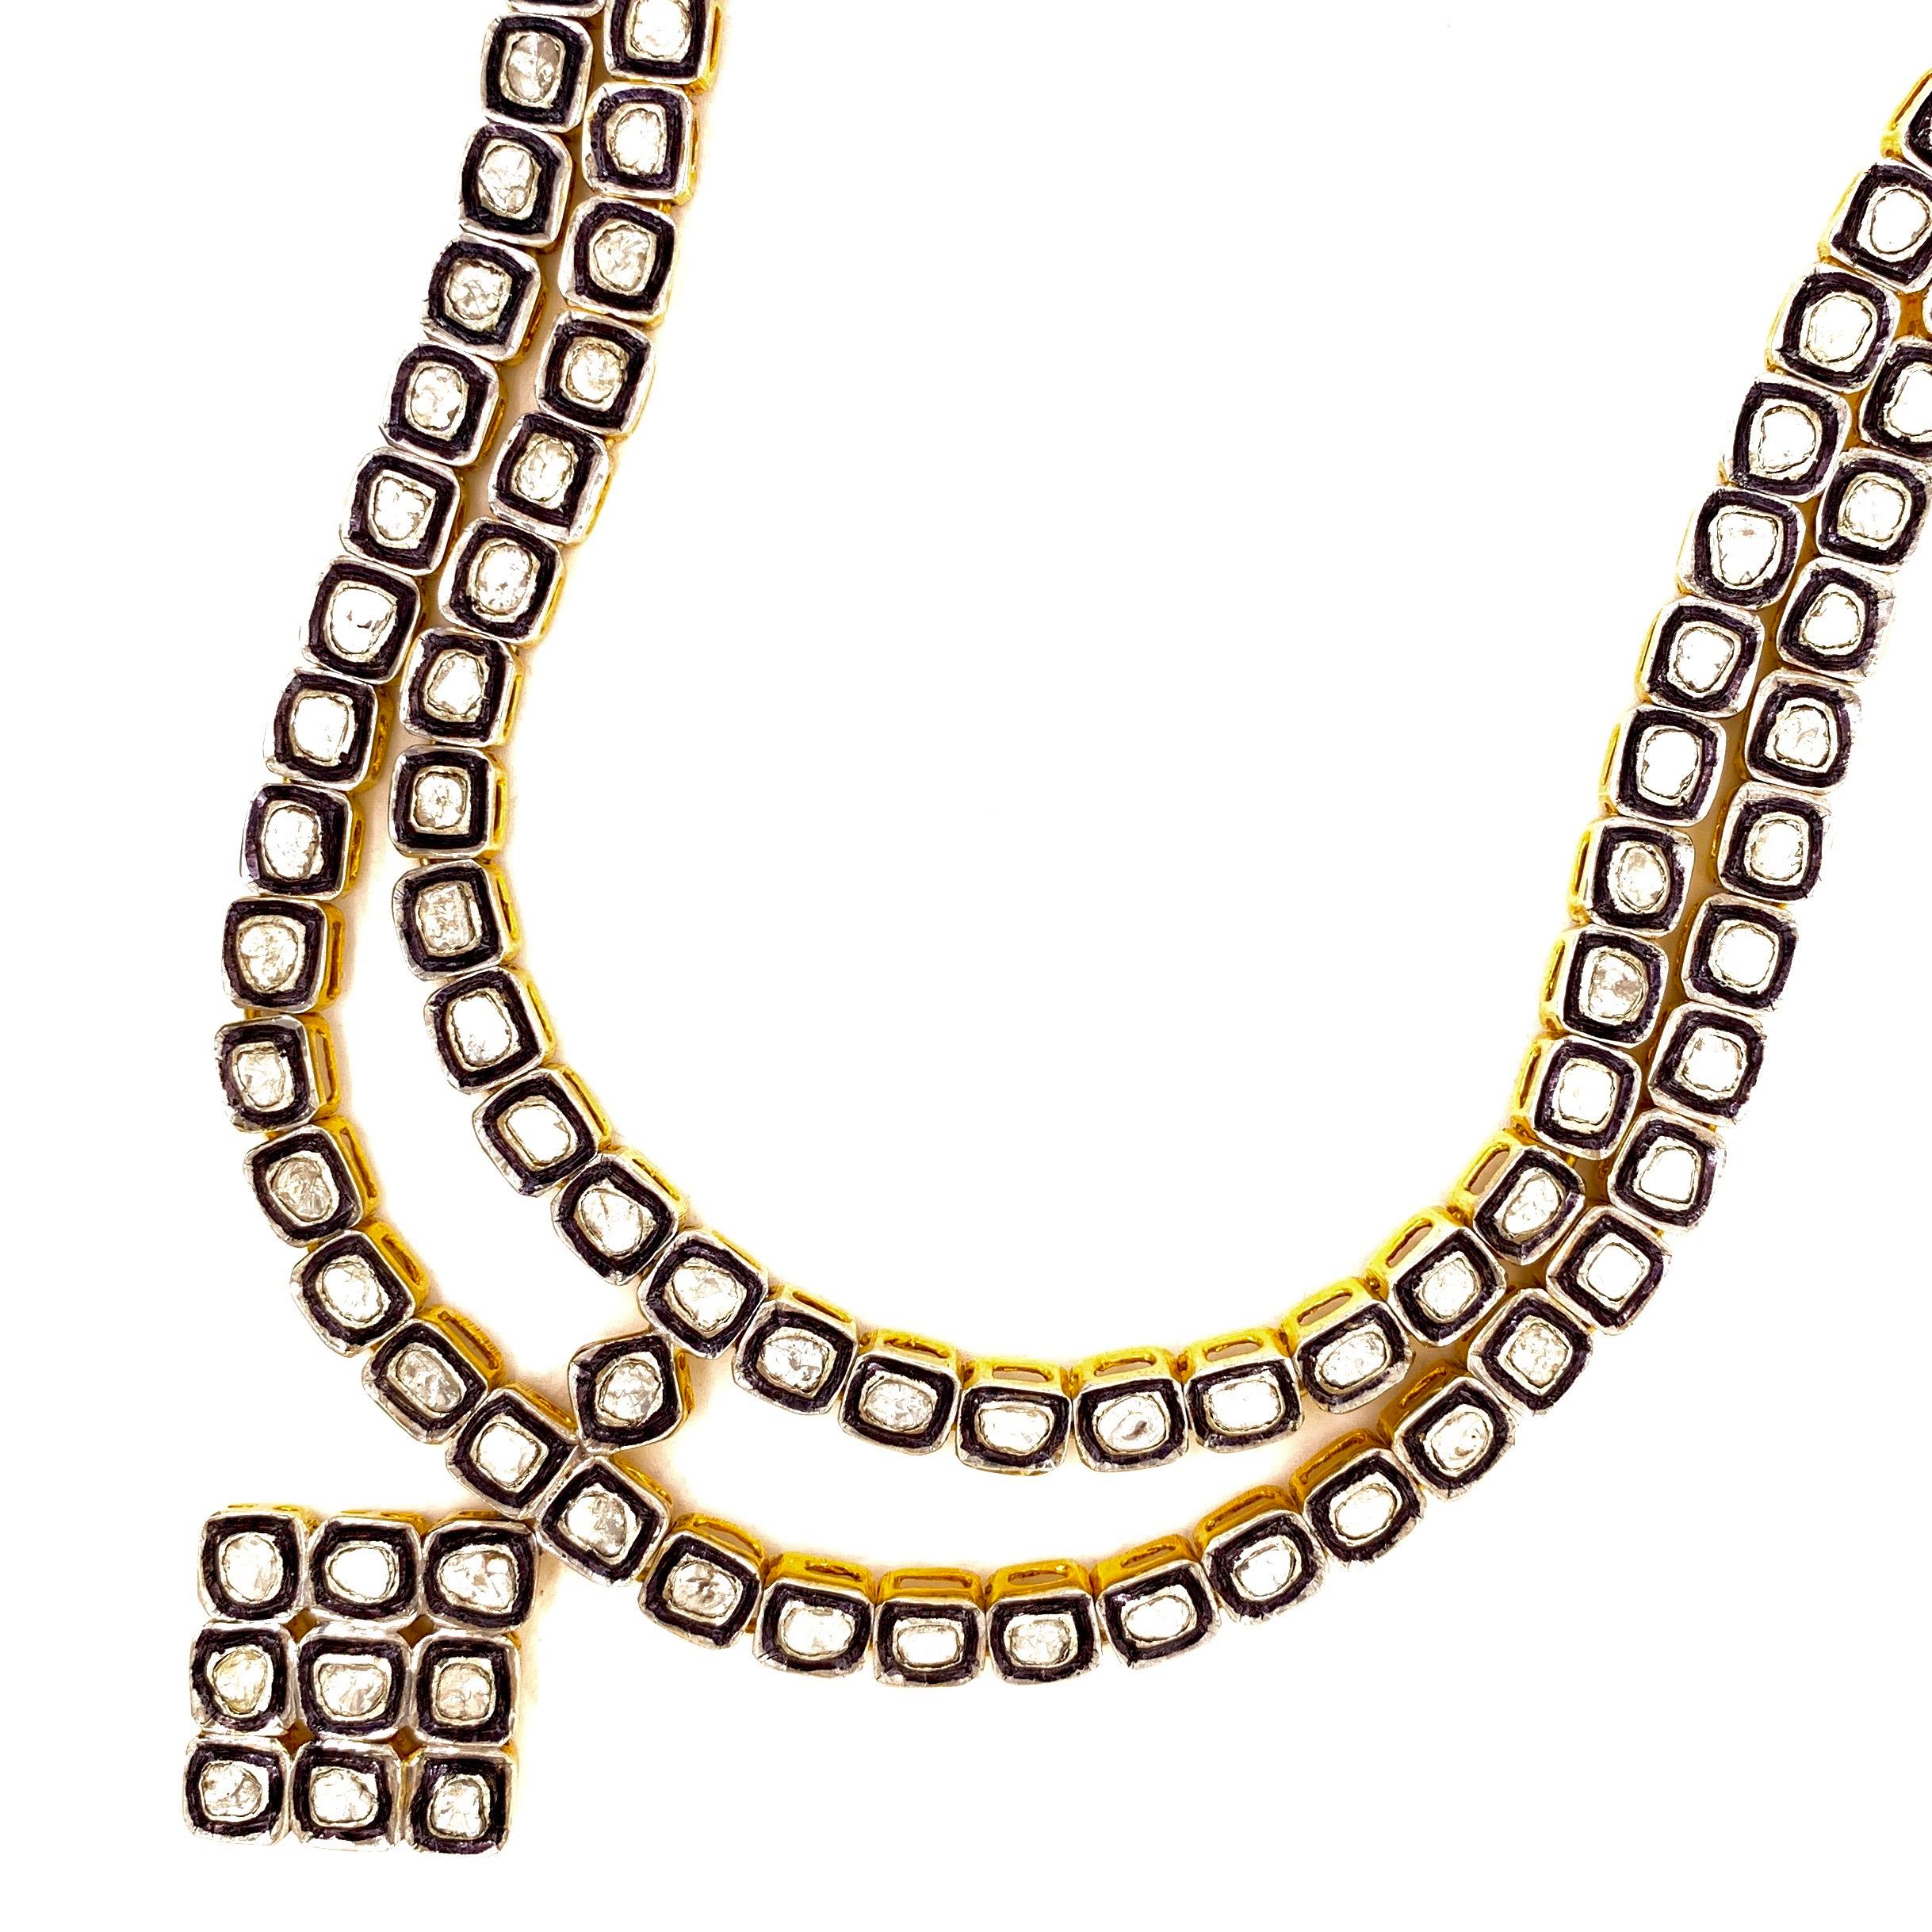 Mughal inspired diamond necklace. Handcrafted, 2 rows of fancy tabular cut 17 carats diamonds mounted in bezel setting, with dangling pendant, accented with oxidized contrast.  Elegant design is set in silver with 18 karat yellow gold plating, along